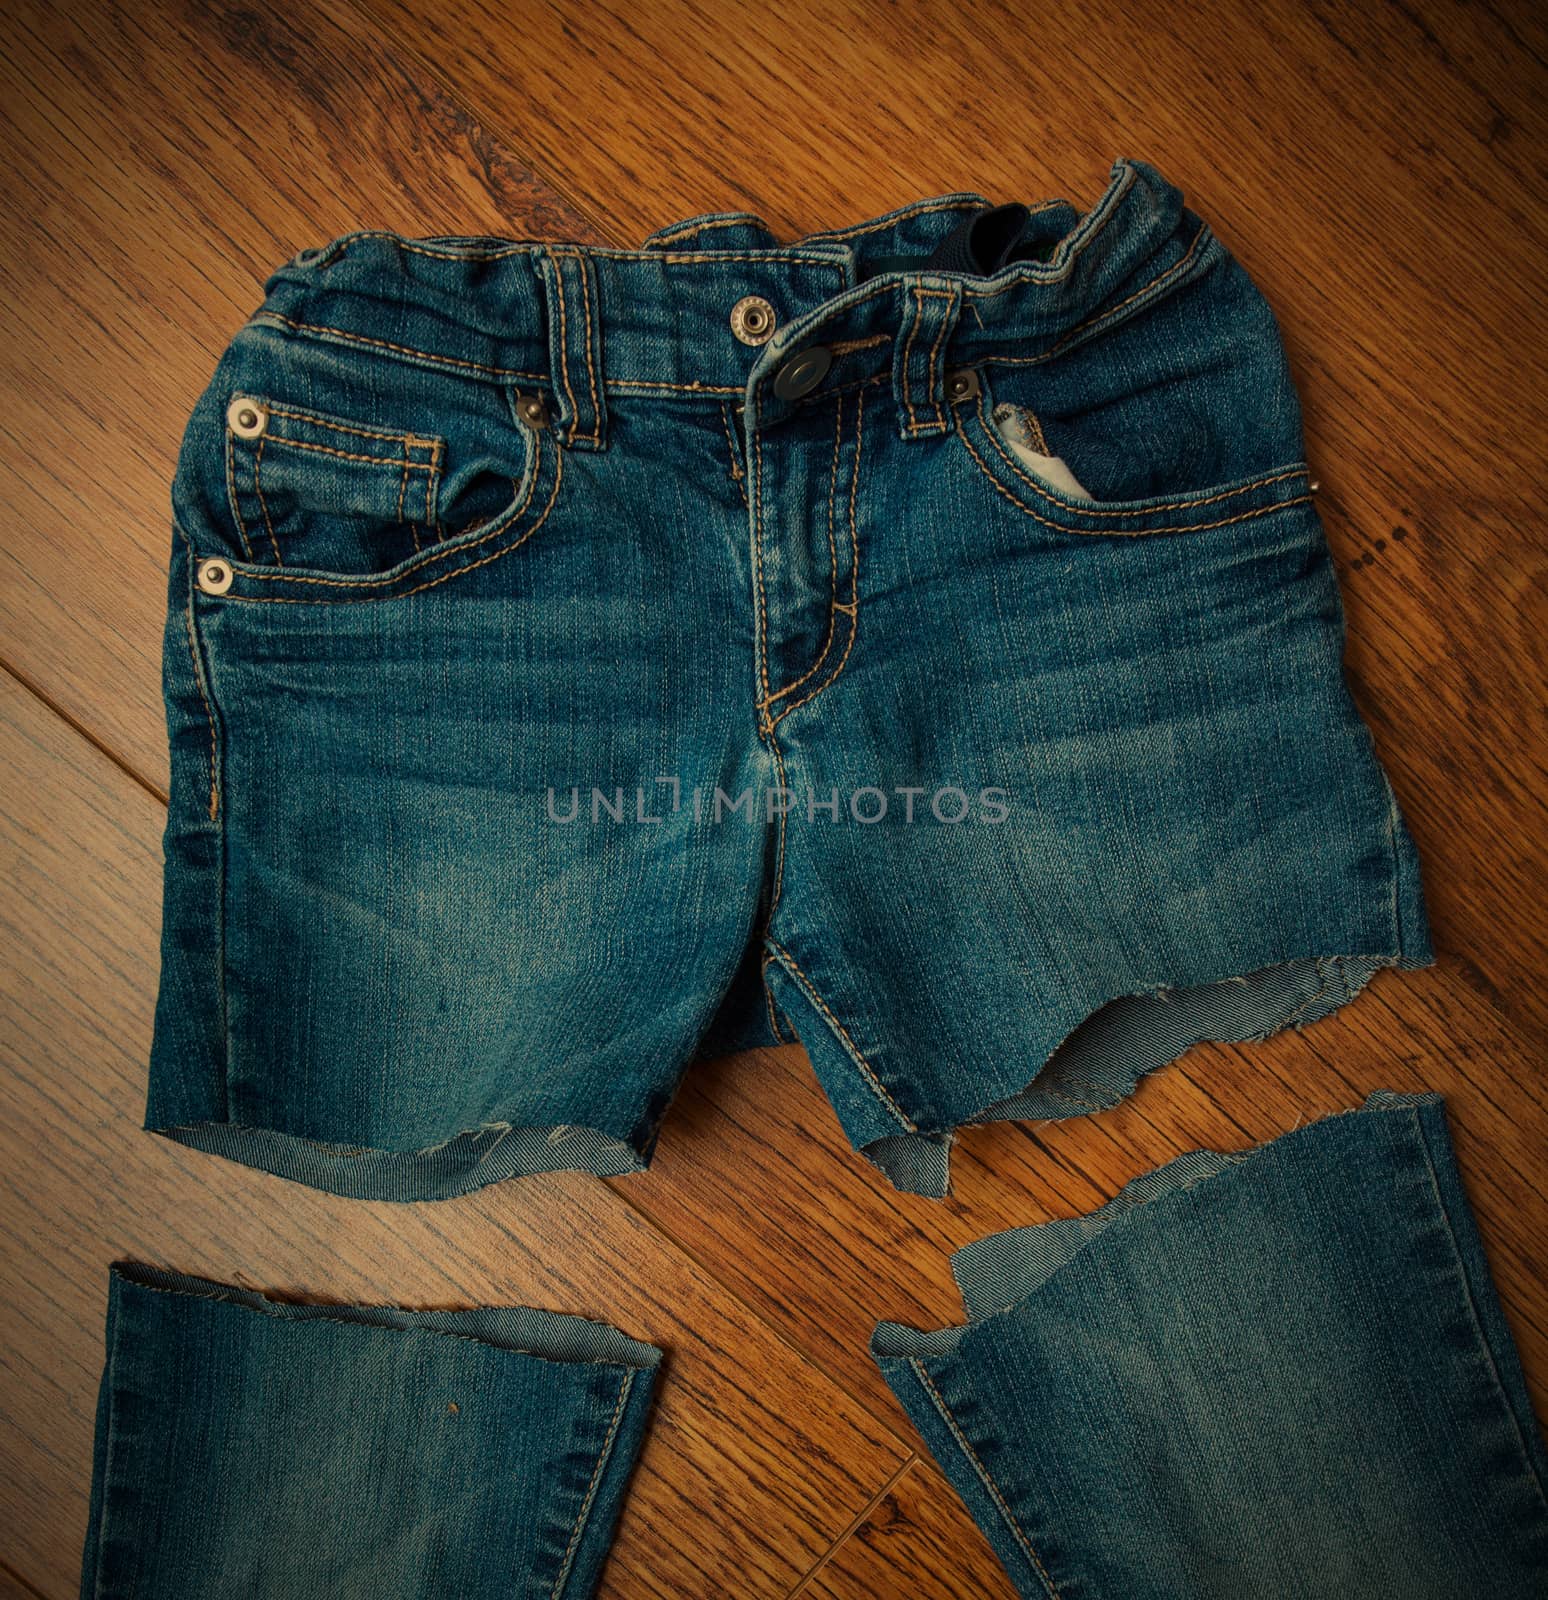 cut old jeans on wooden boards, instagram image style